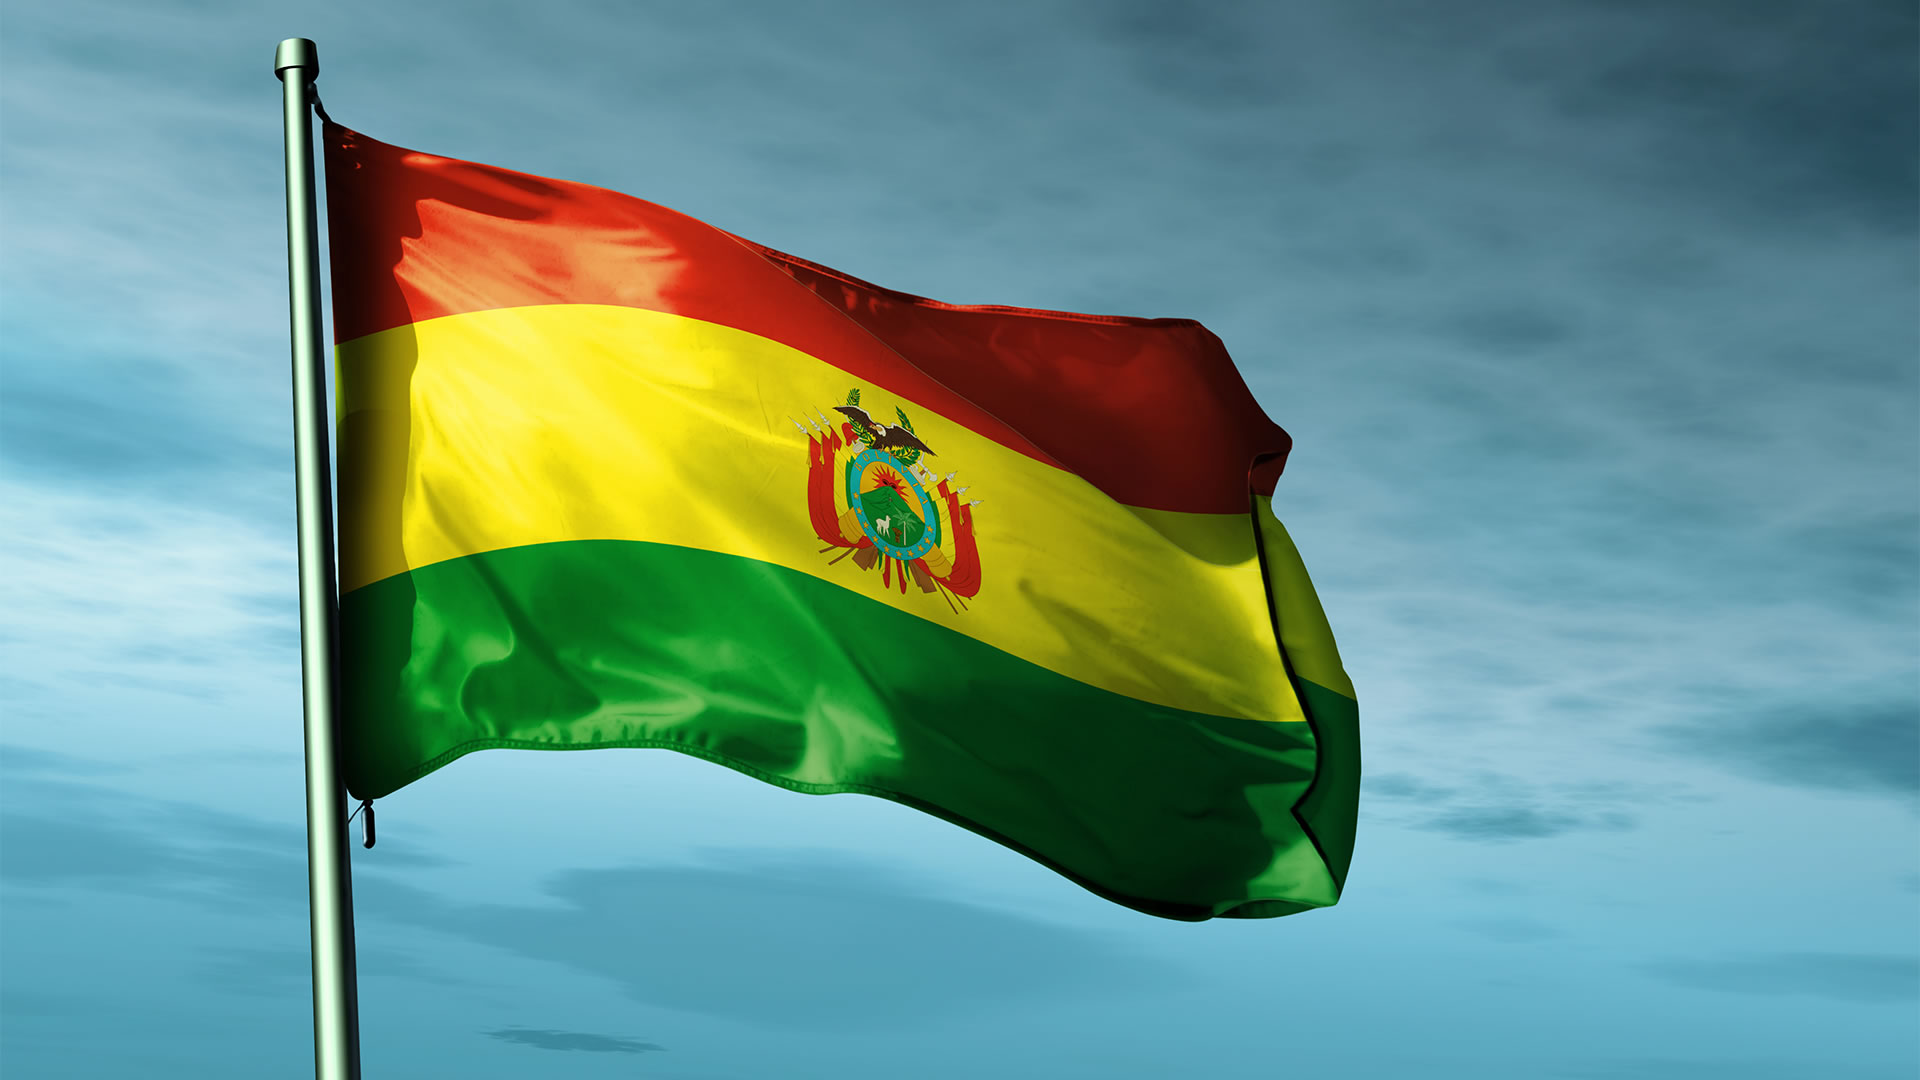 The flags of Bolivia